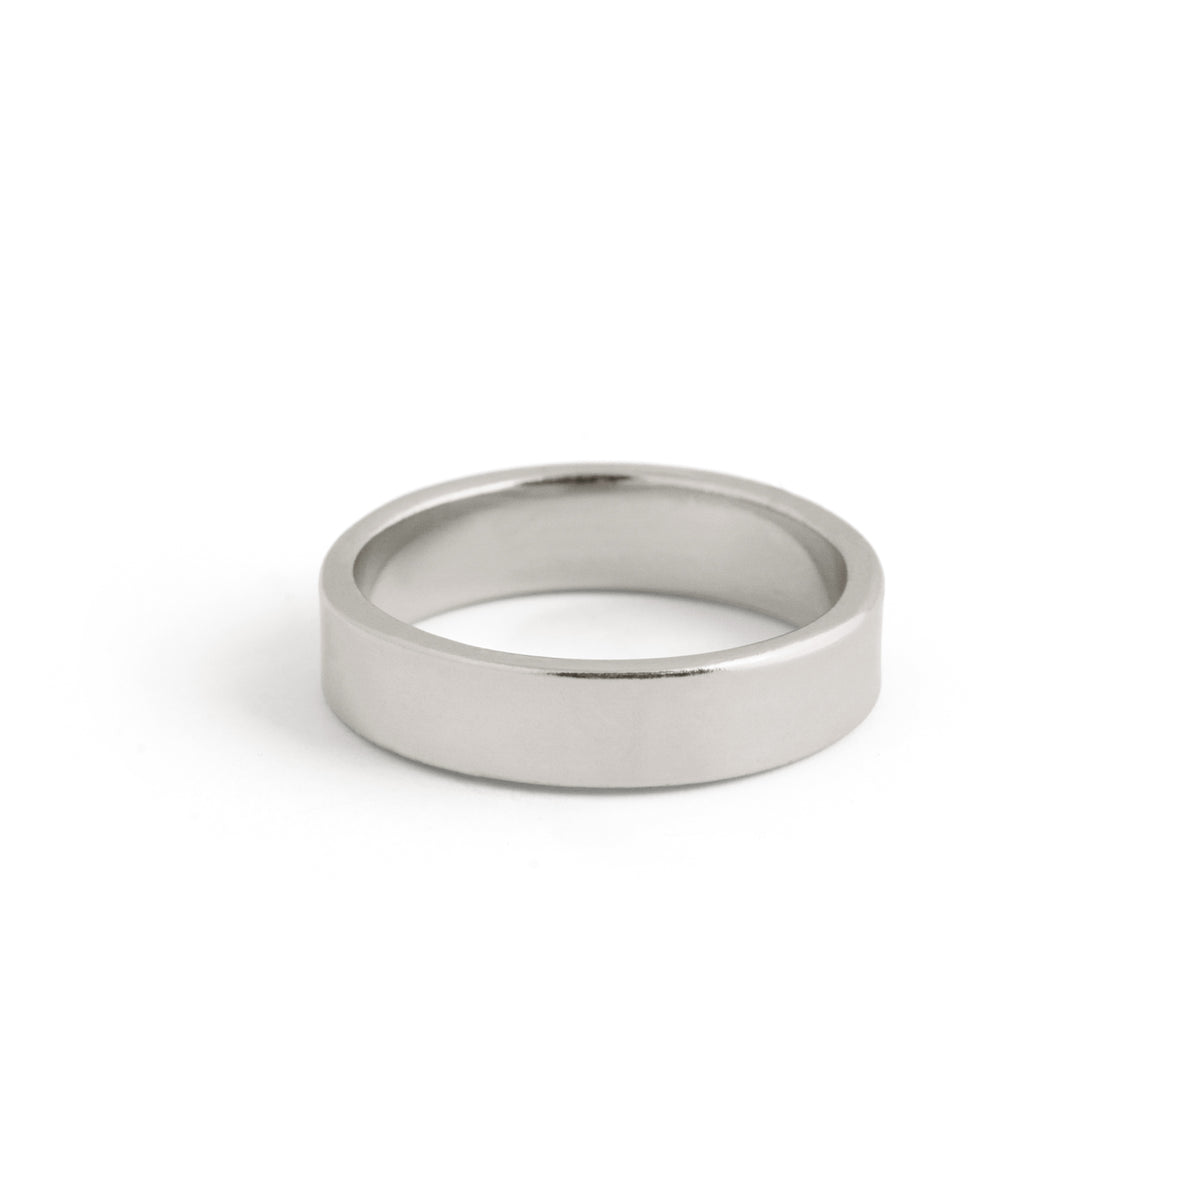 5mm Band Ring - Silver